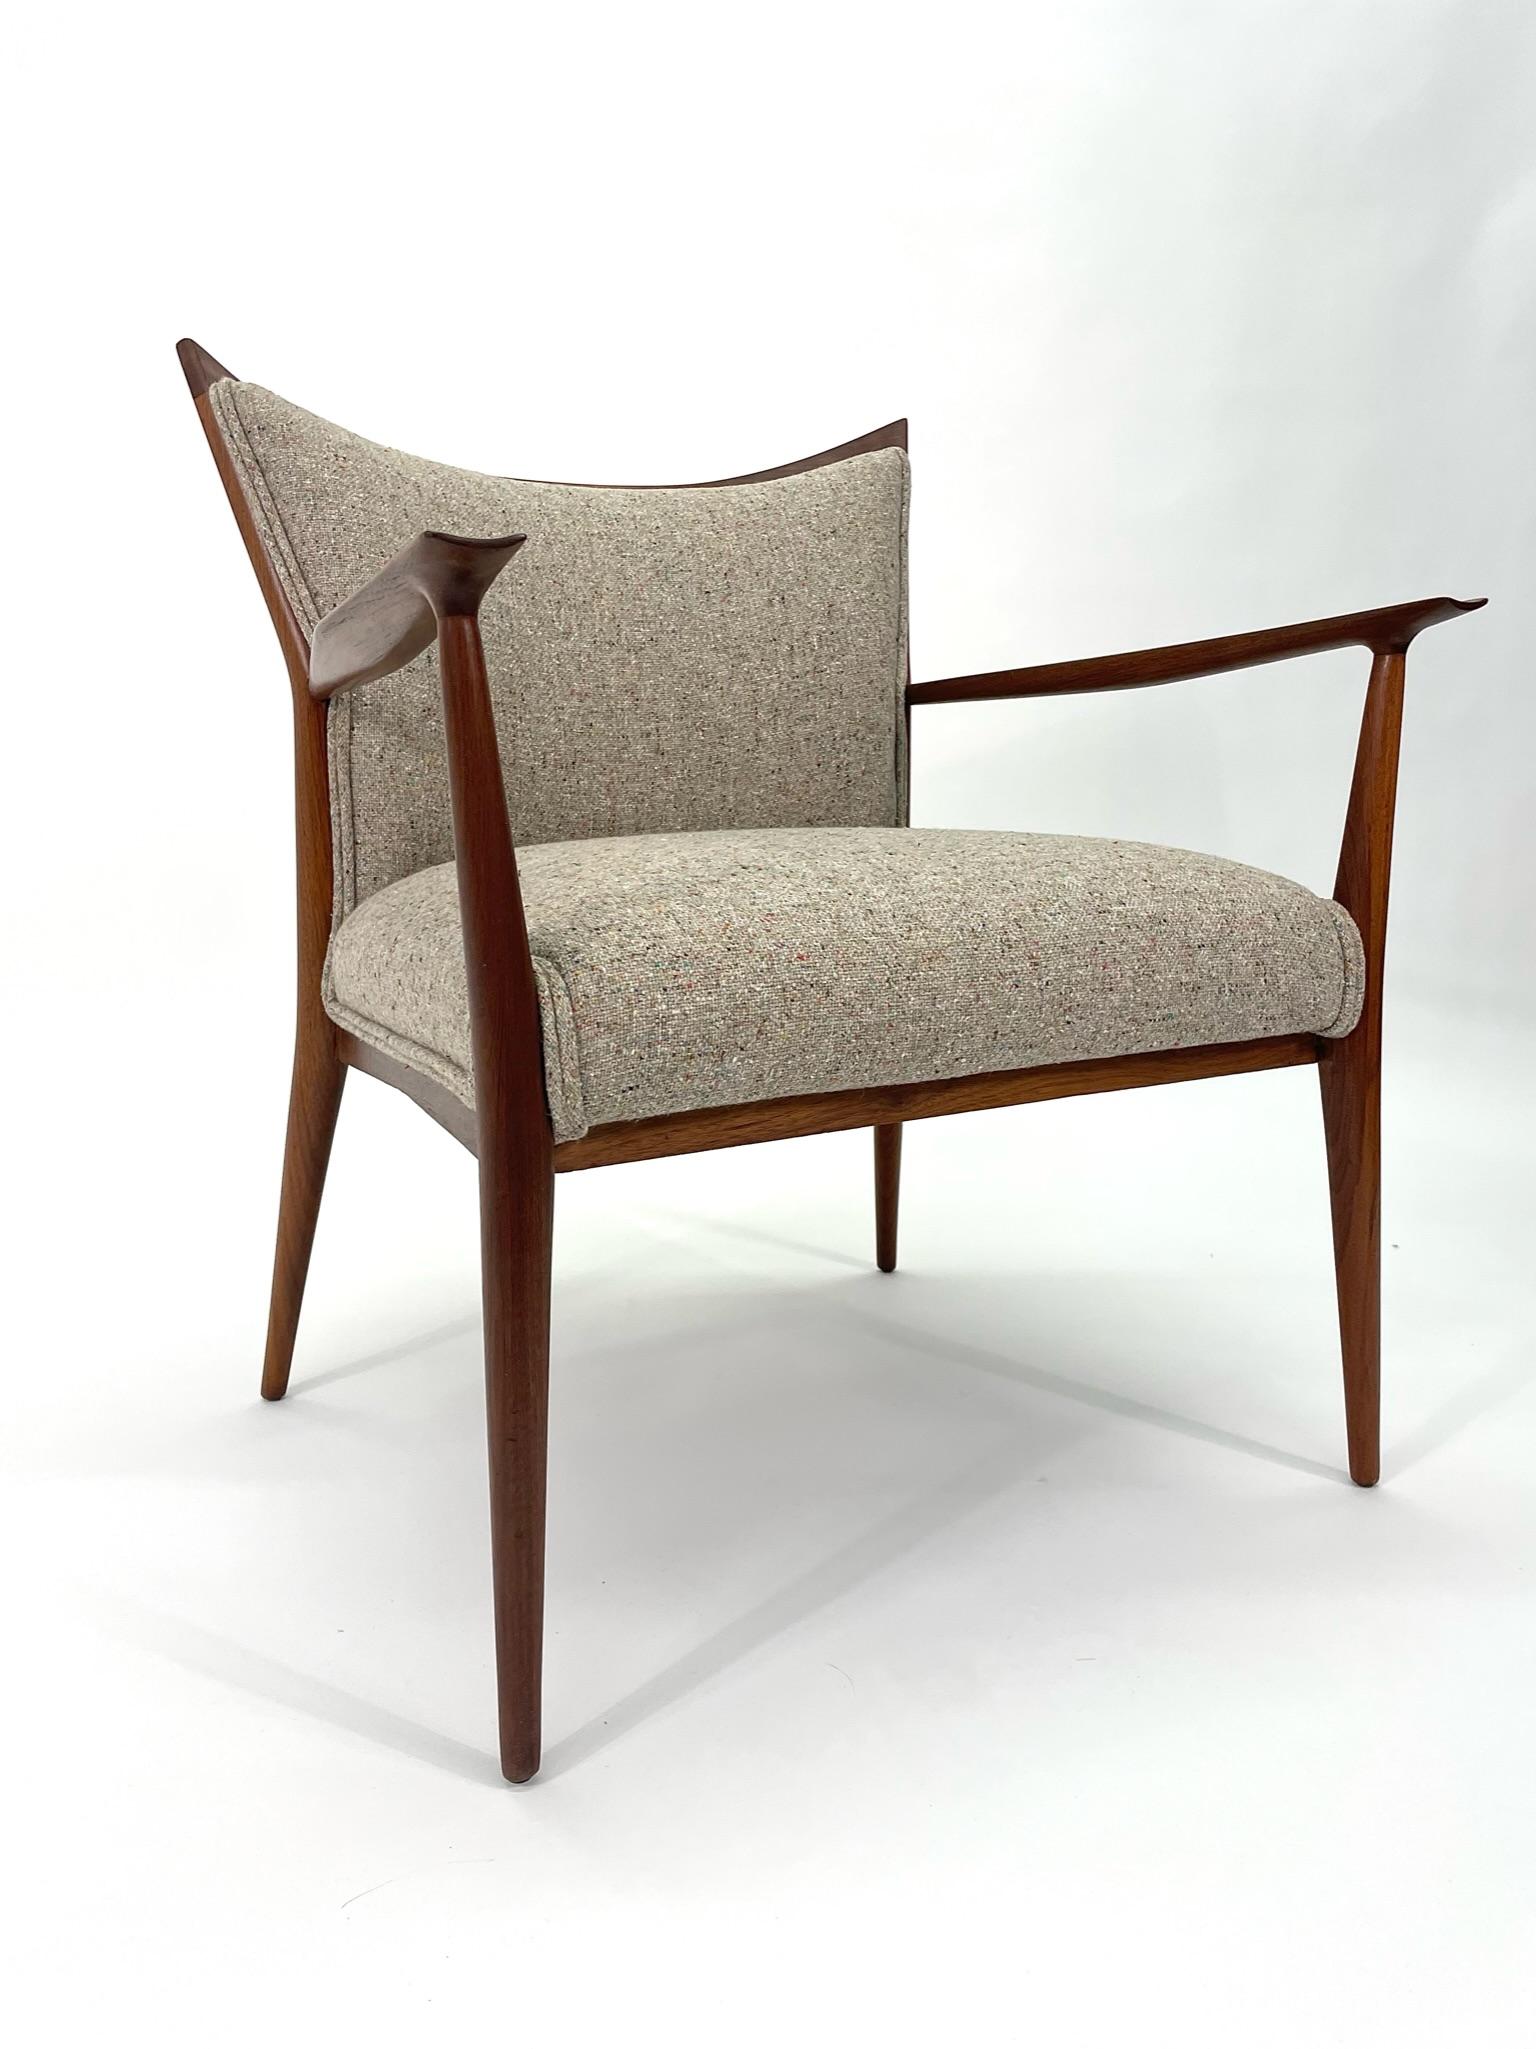 This is a rarely seen Paul McCobb Armchair for Directional. This elegant chair features a solid walnut frame with the most elegant curved backrest, curved fronts legs, and arms. It is a seriously comfortable chair, marrying form and function